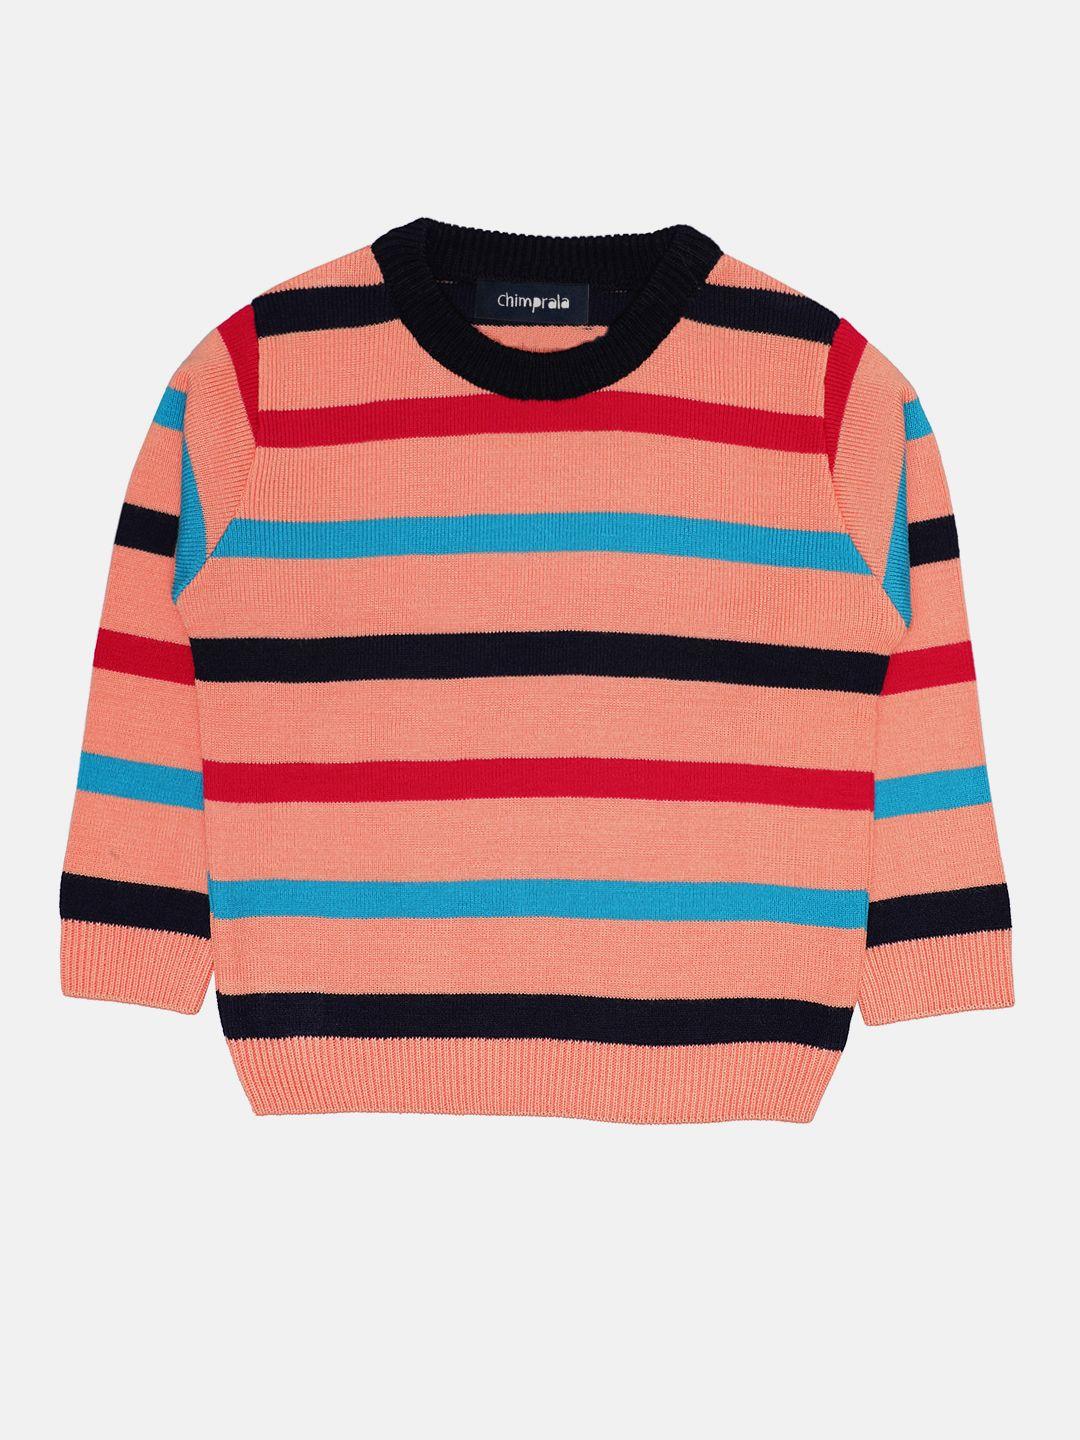 chimprala boys pink & red striped woolen pullover